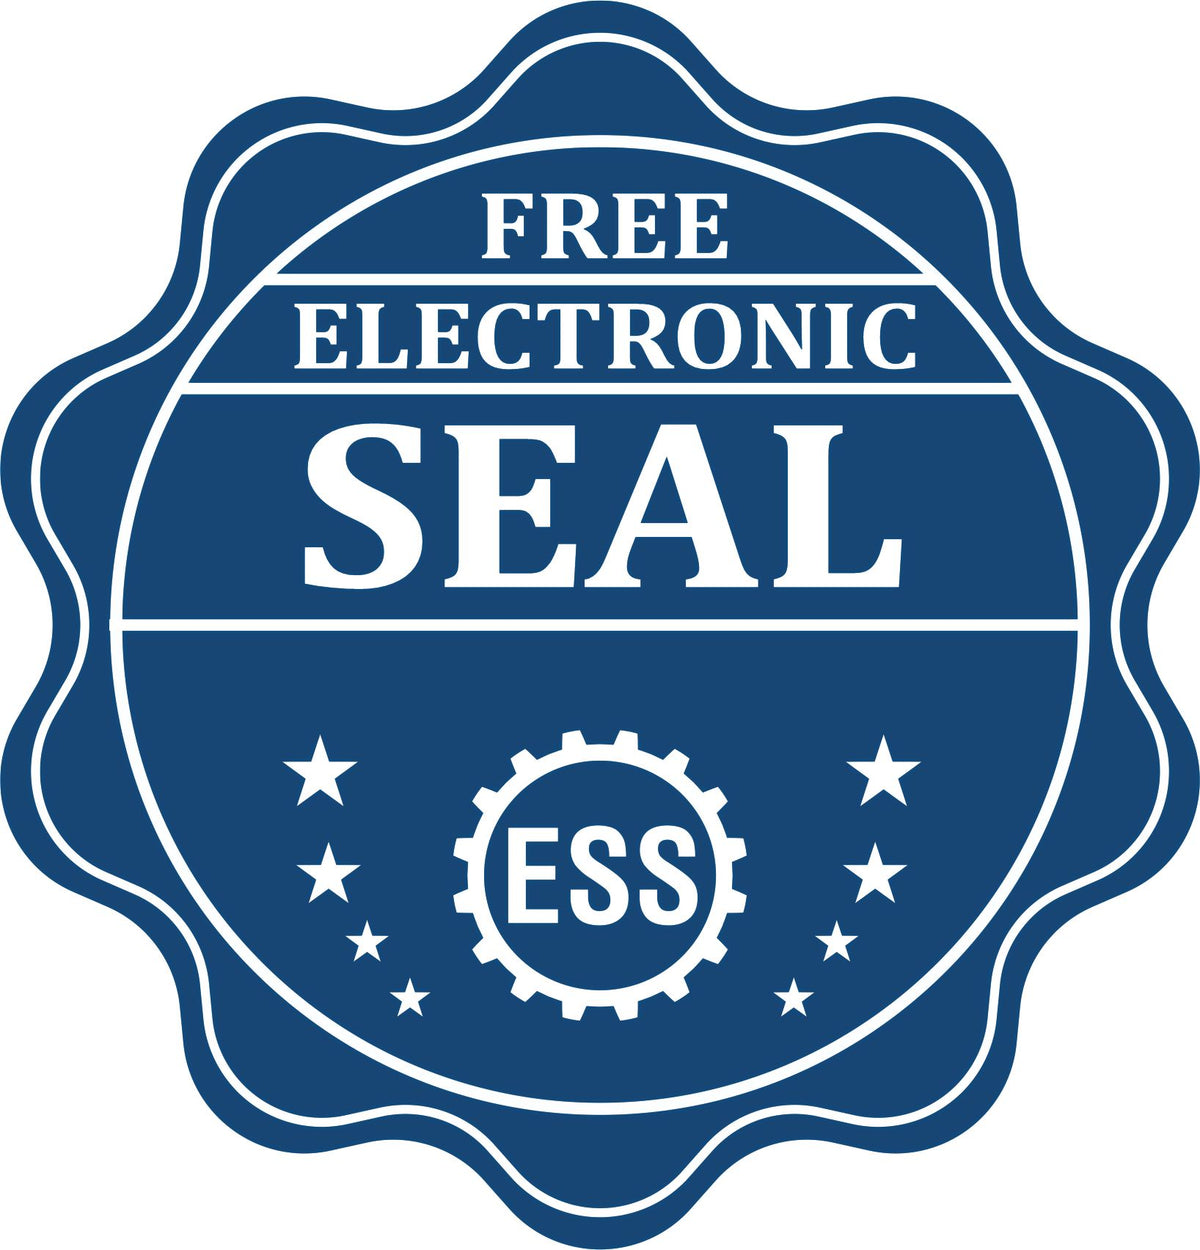 A badge showing a free electronic seal for the Slim Pre-Inked Kansas Professional Geologist Seal Stamp with stars and the ESS gear on the emblem.